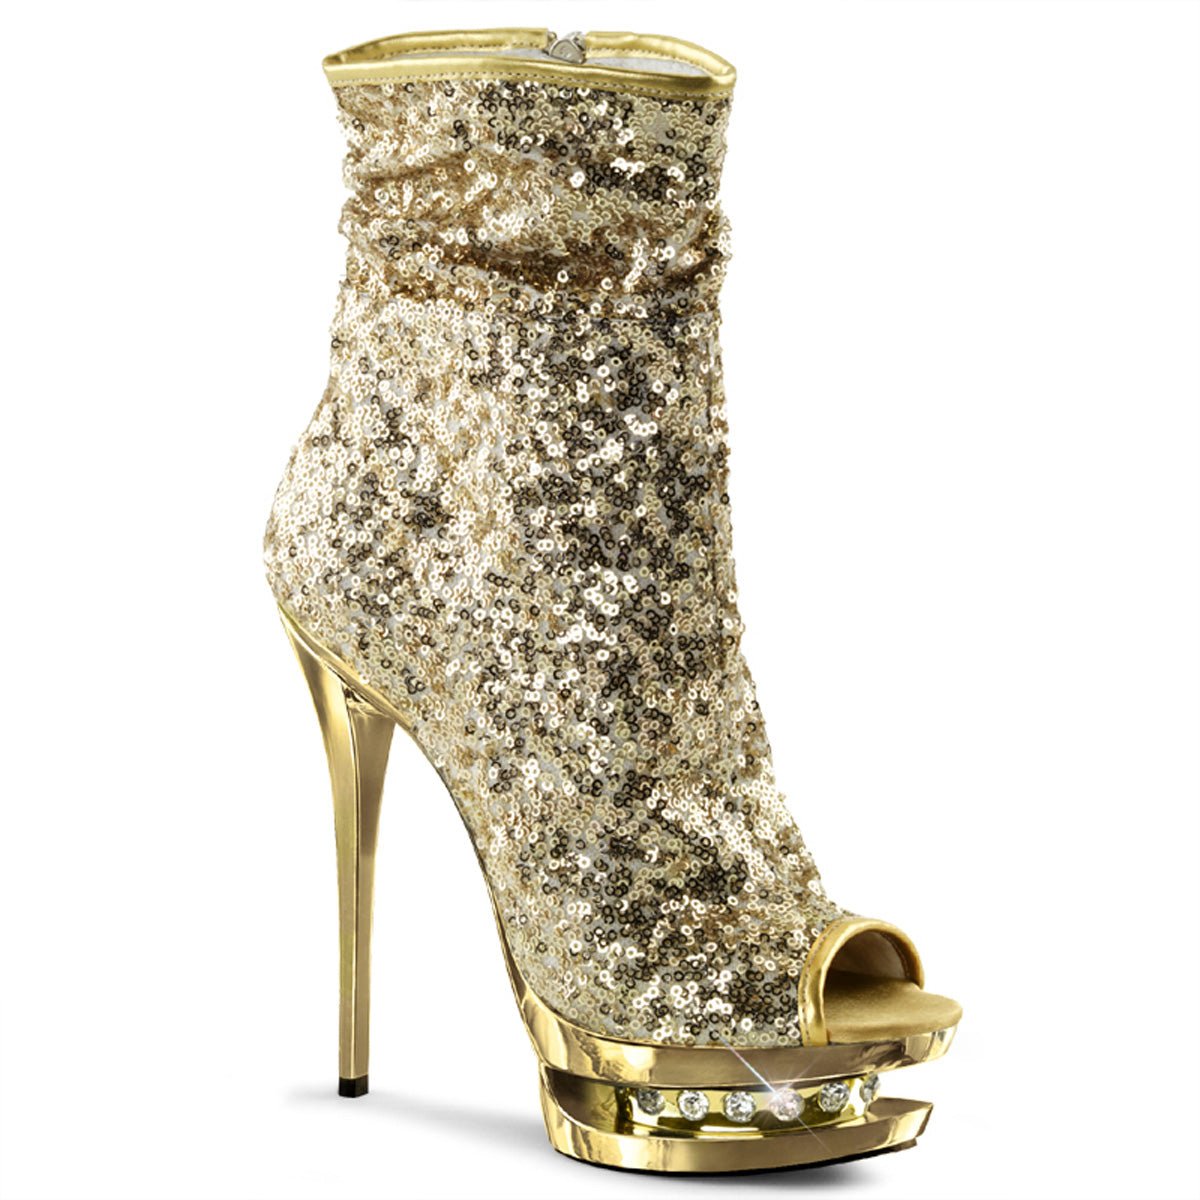 Clearance Pleaser Blondie R 1008 Gold Sequins Size 5UK/8USA - From Clearance Sold By Alternative Footwear